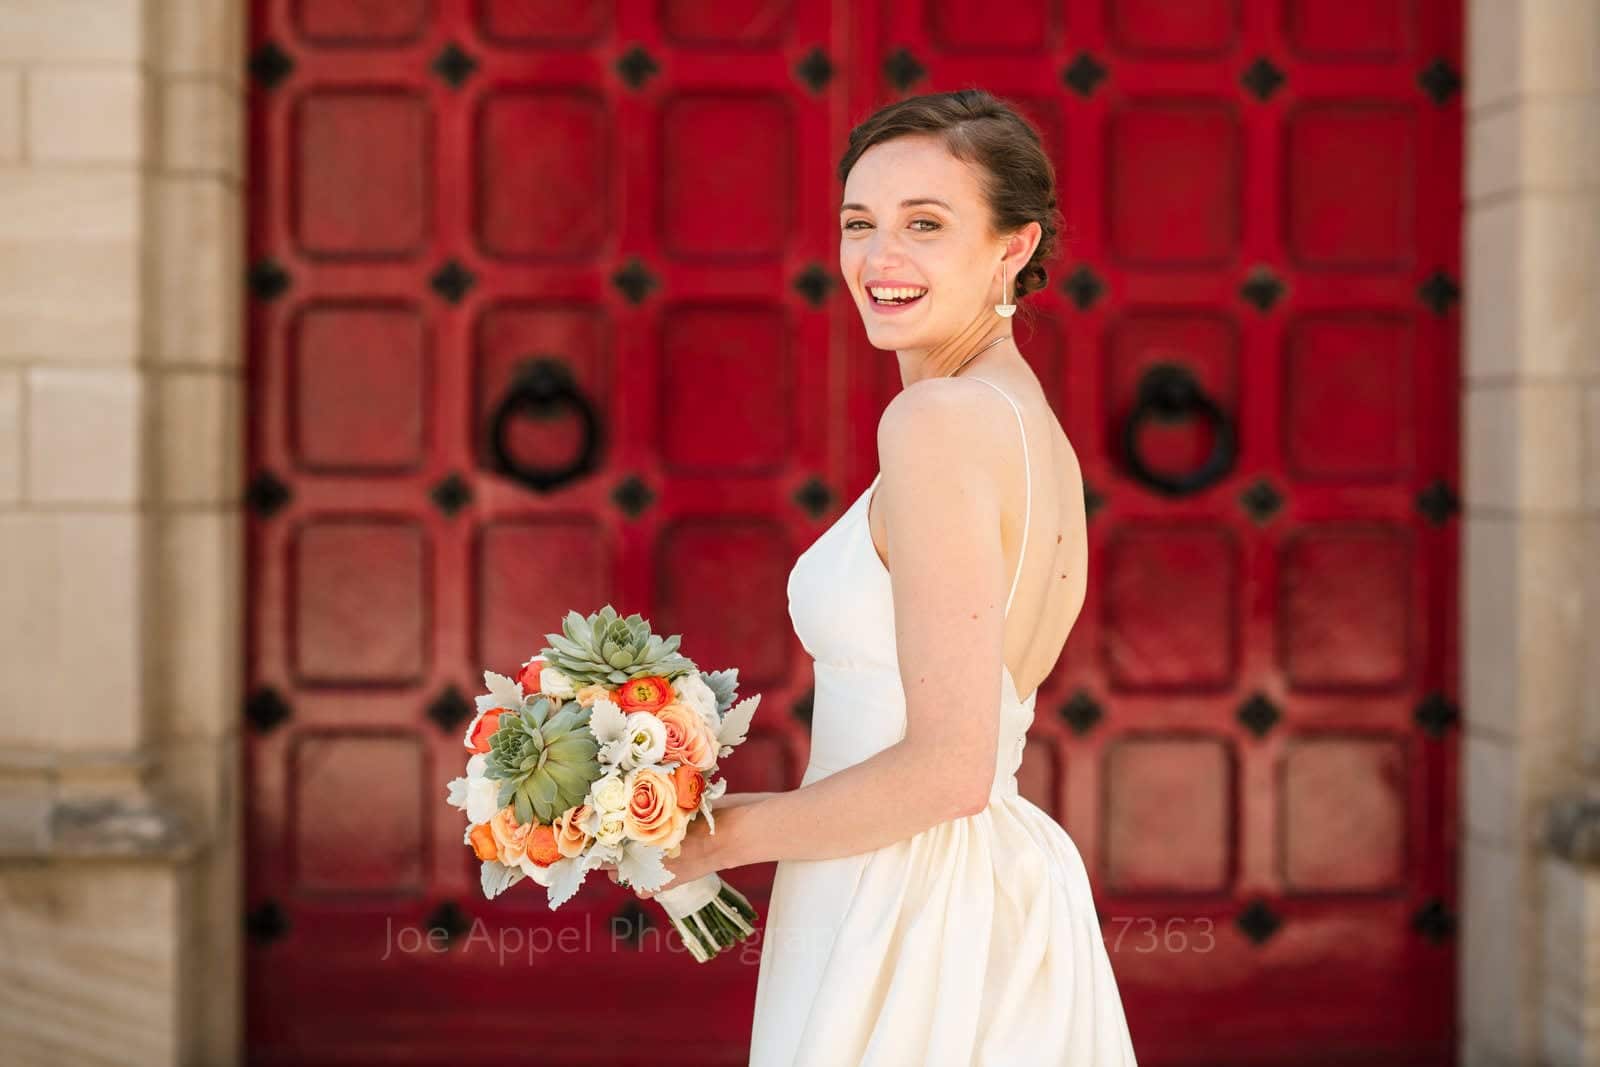 A smiling bride holds her bouquet as she looks over her shoulder while standing in front of a set of red wooden doors at the Stephen Foster Memorial.